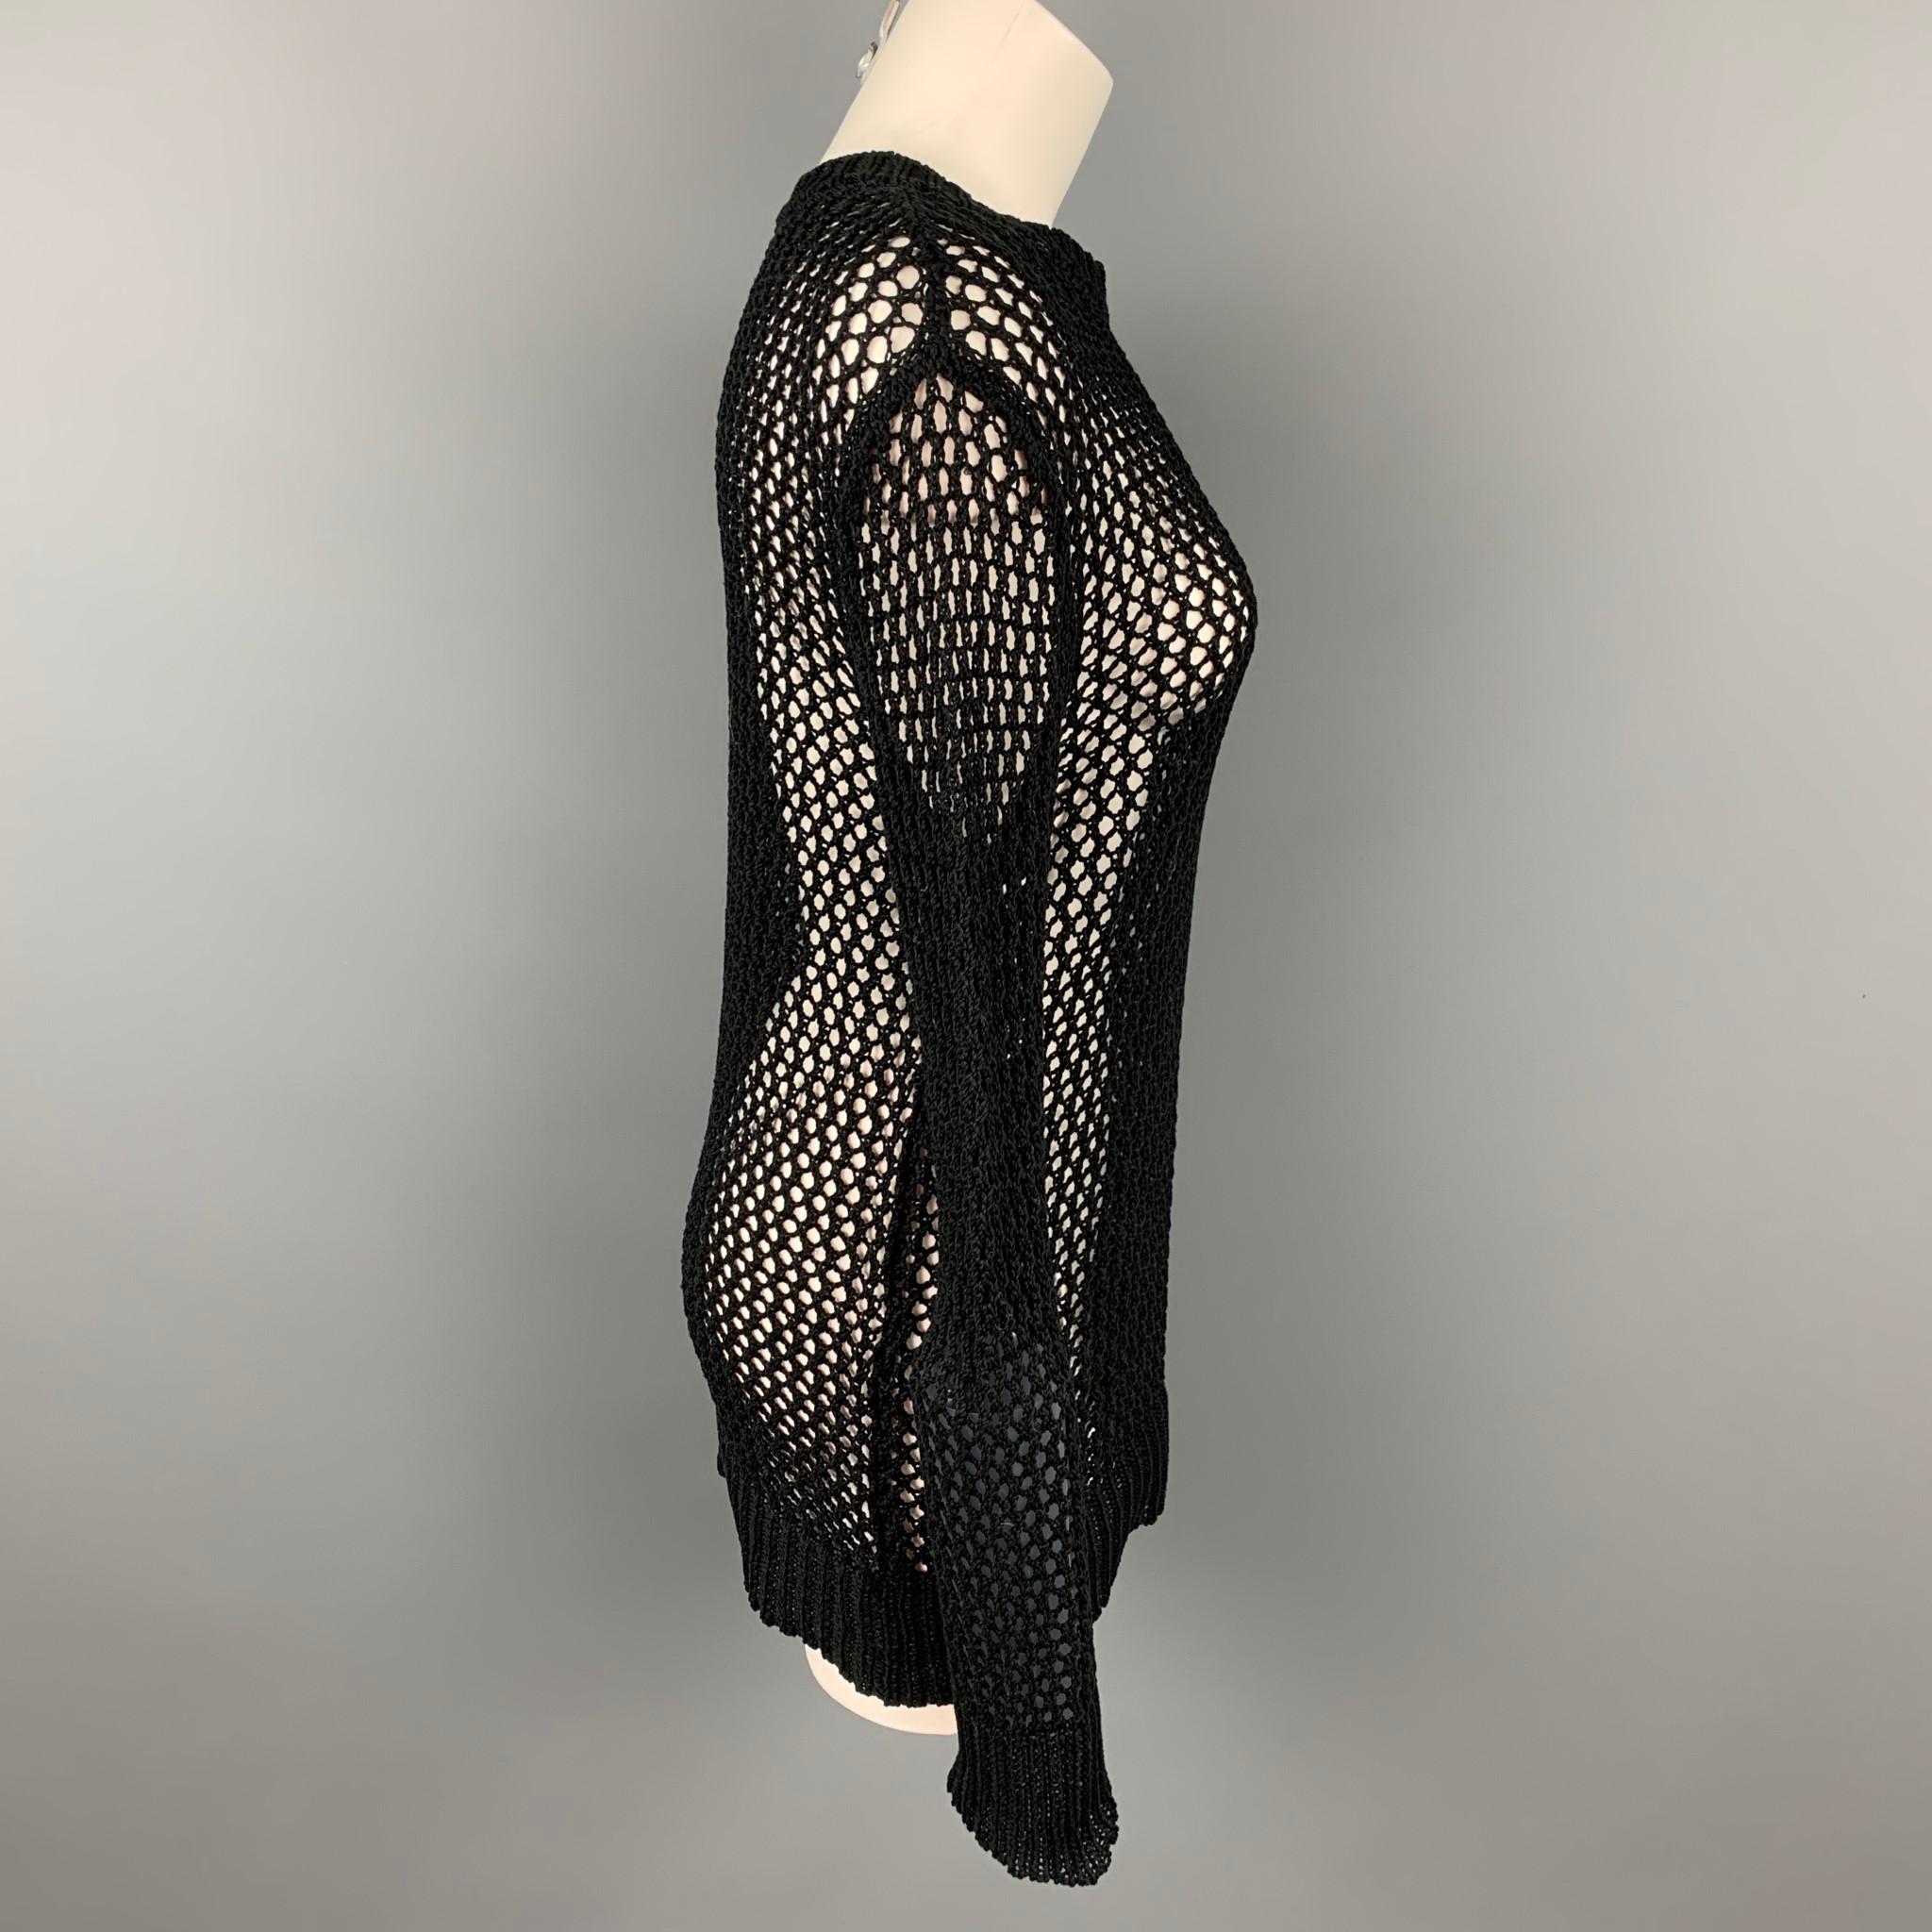 DRIES VAN NOTEN pullover comes in a black mesh cotton featuring a crew-neck. 

Very Good Pre-Owned Condition.
Marked: L

Measurements:

Shoulder: 18 in.
Bust: 38 in.
Sleeve: 29 in.
Length: 28 in. 